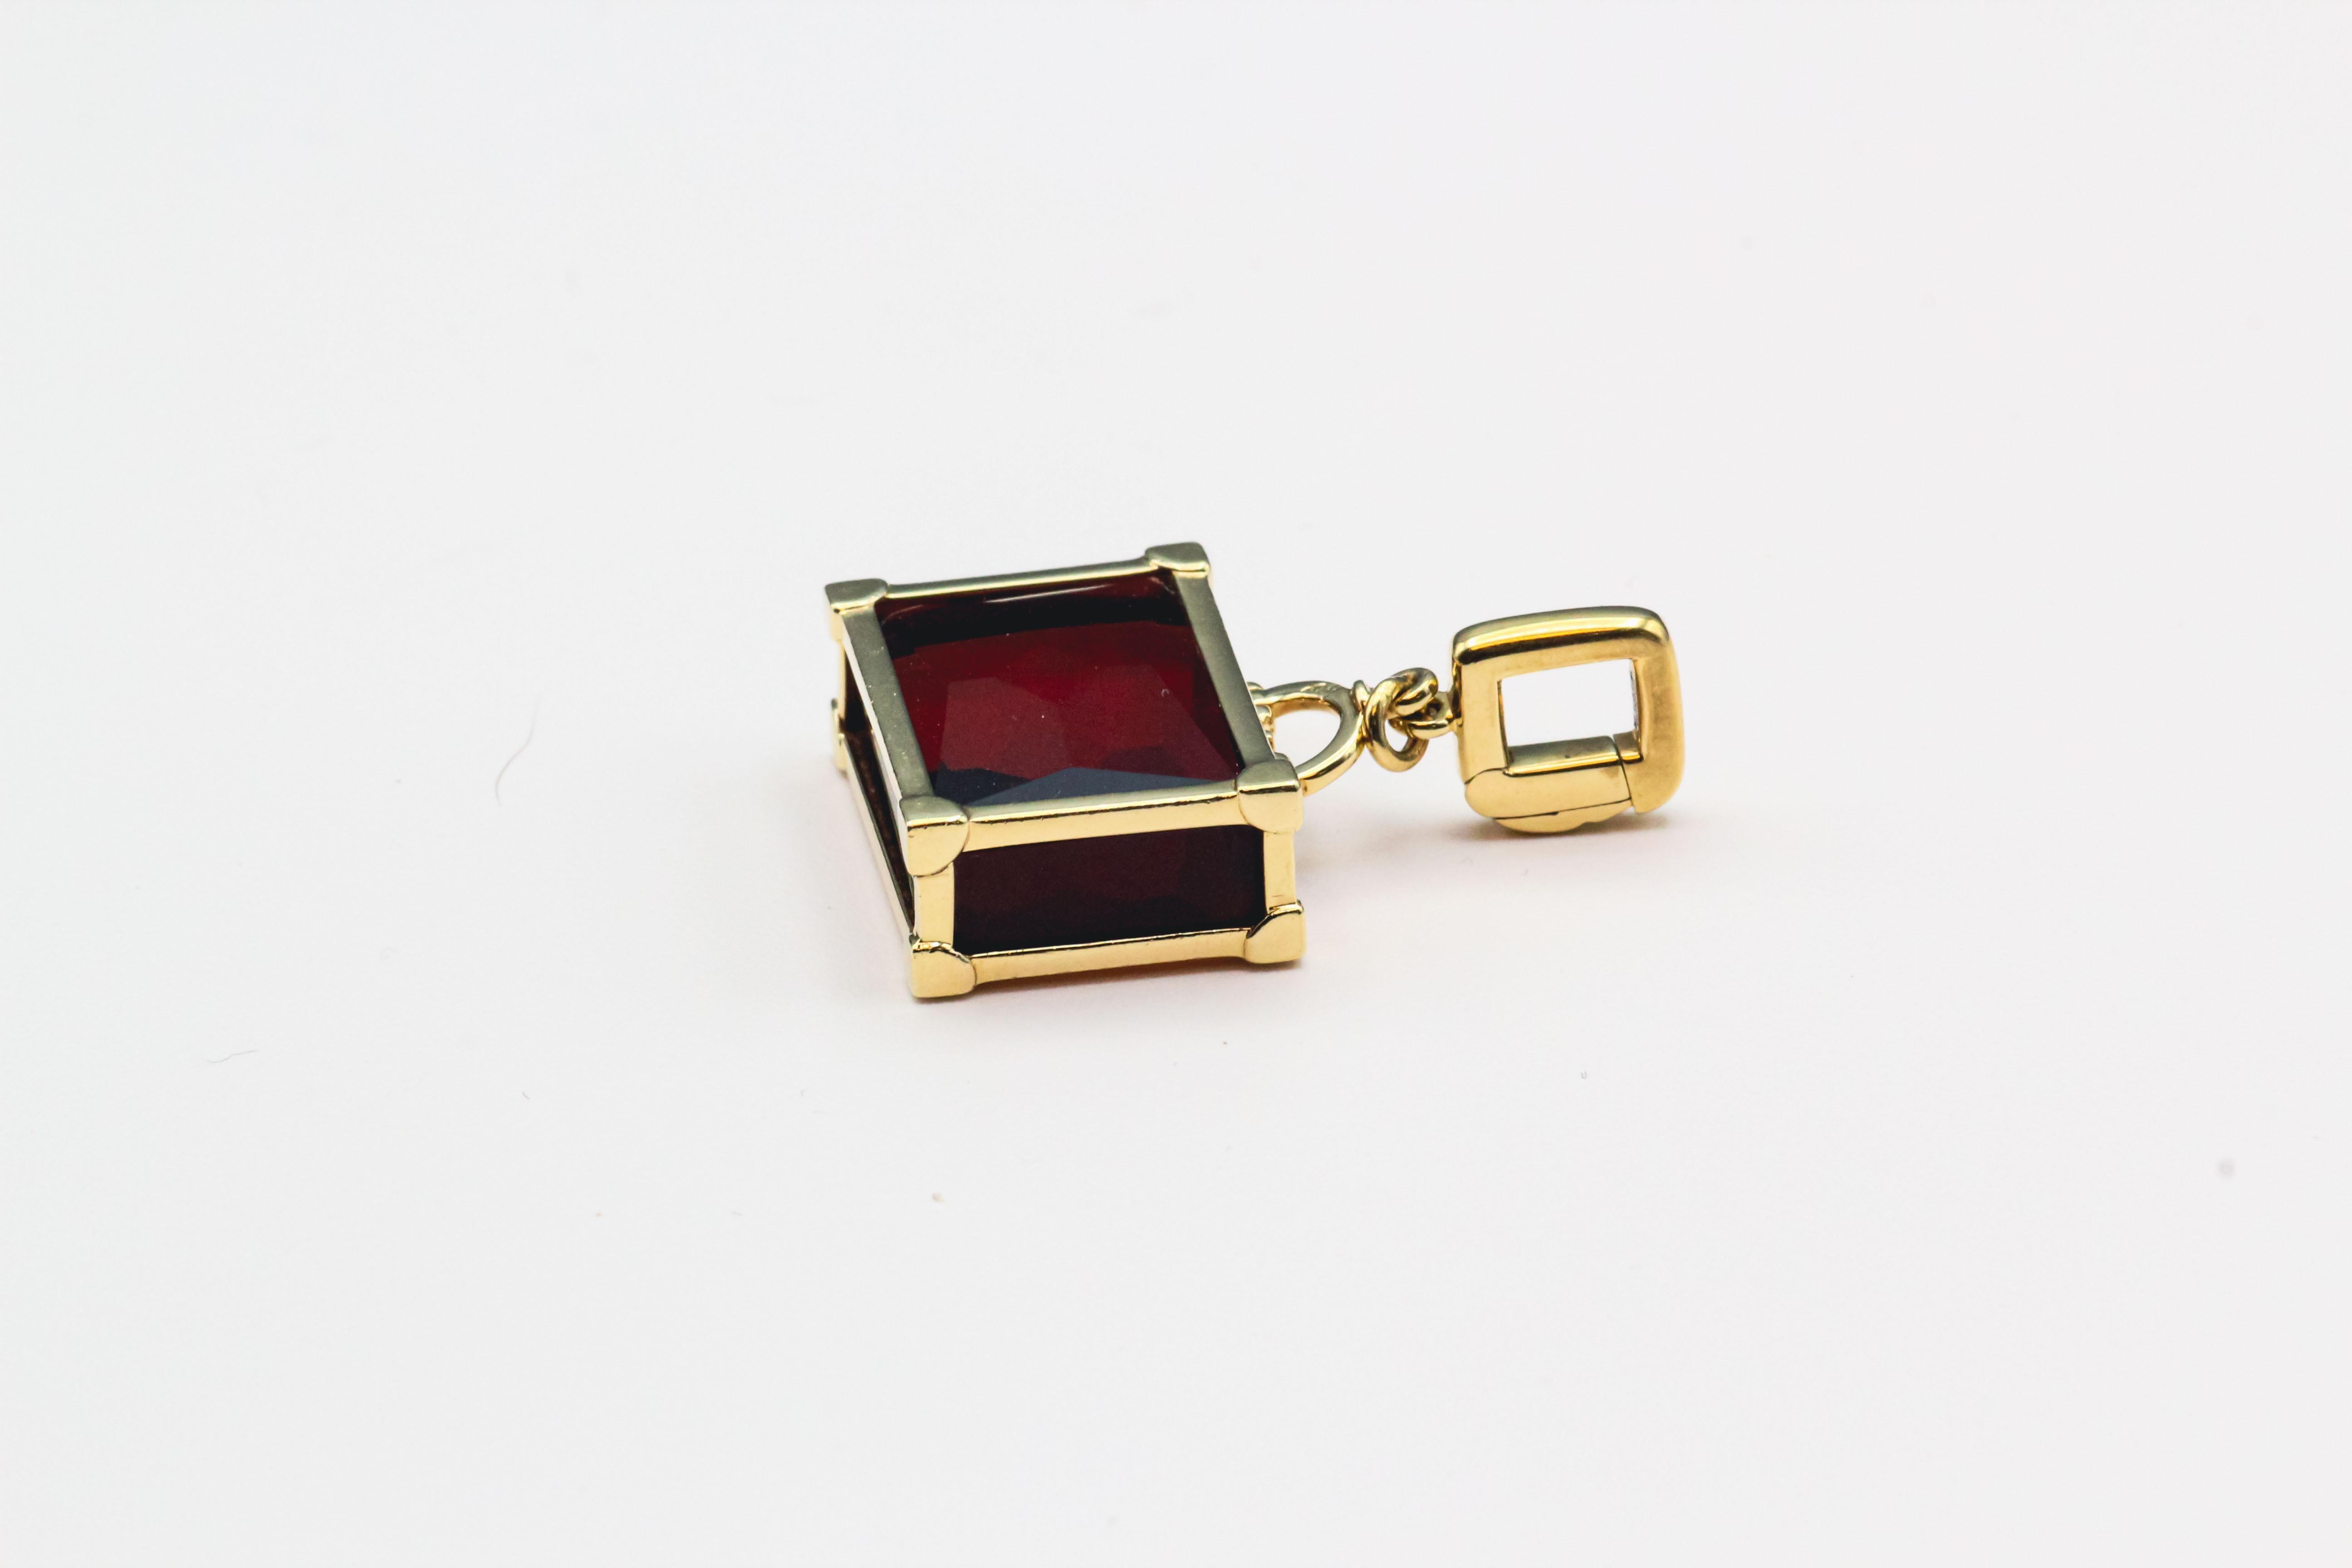 Louis Vuitton 18k Yellow Gold Citrine Suitcase Charm Pendant In Good Condition For Sale In Bellmore, NY